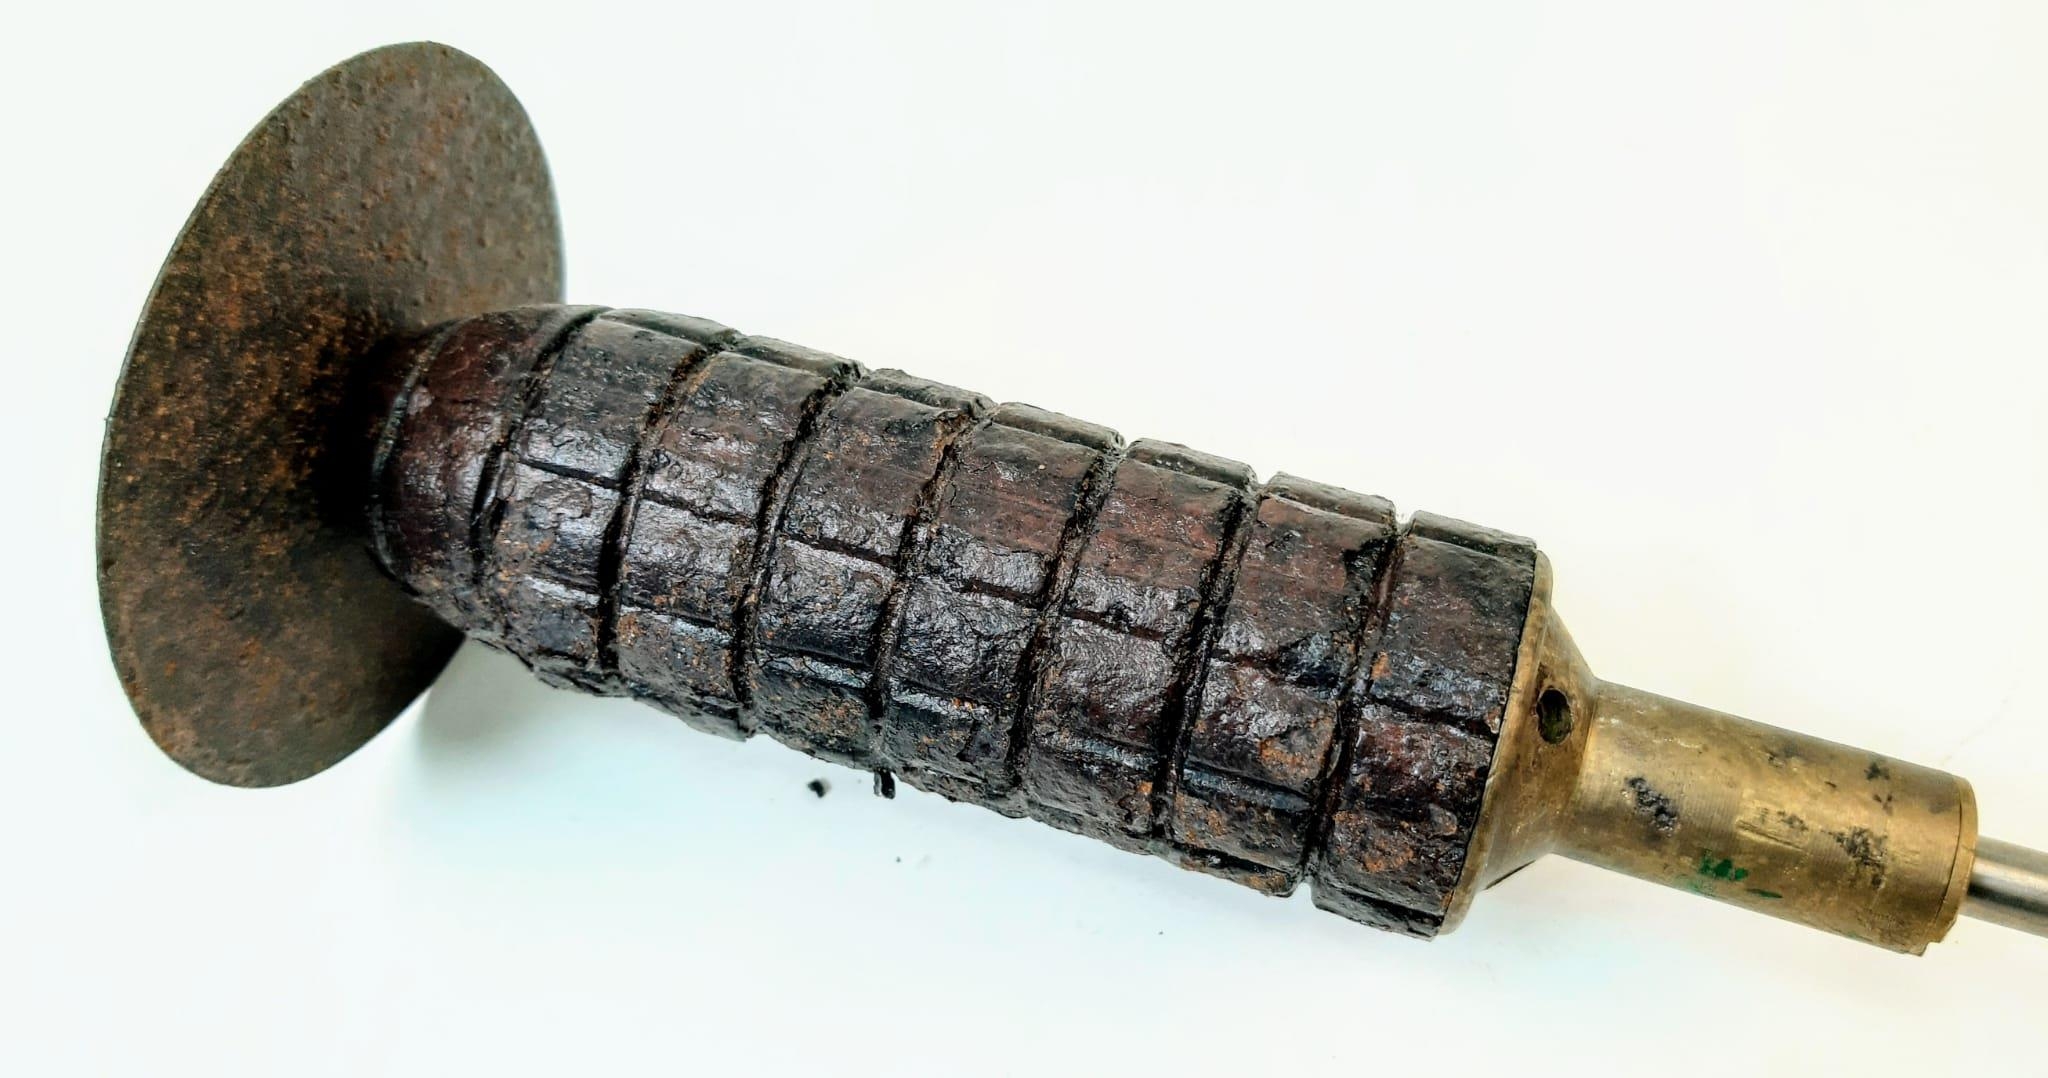 INERT WW1 Imperial German 1915 Model Rifle Fragmentation Grenade with Brass Fuze and Range - Image 4 of 4